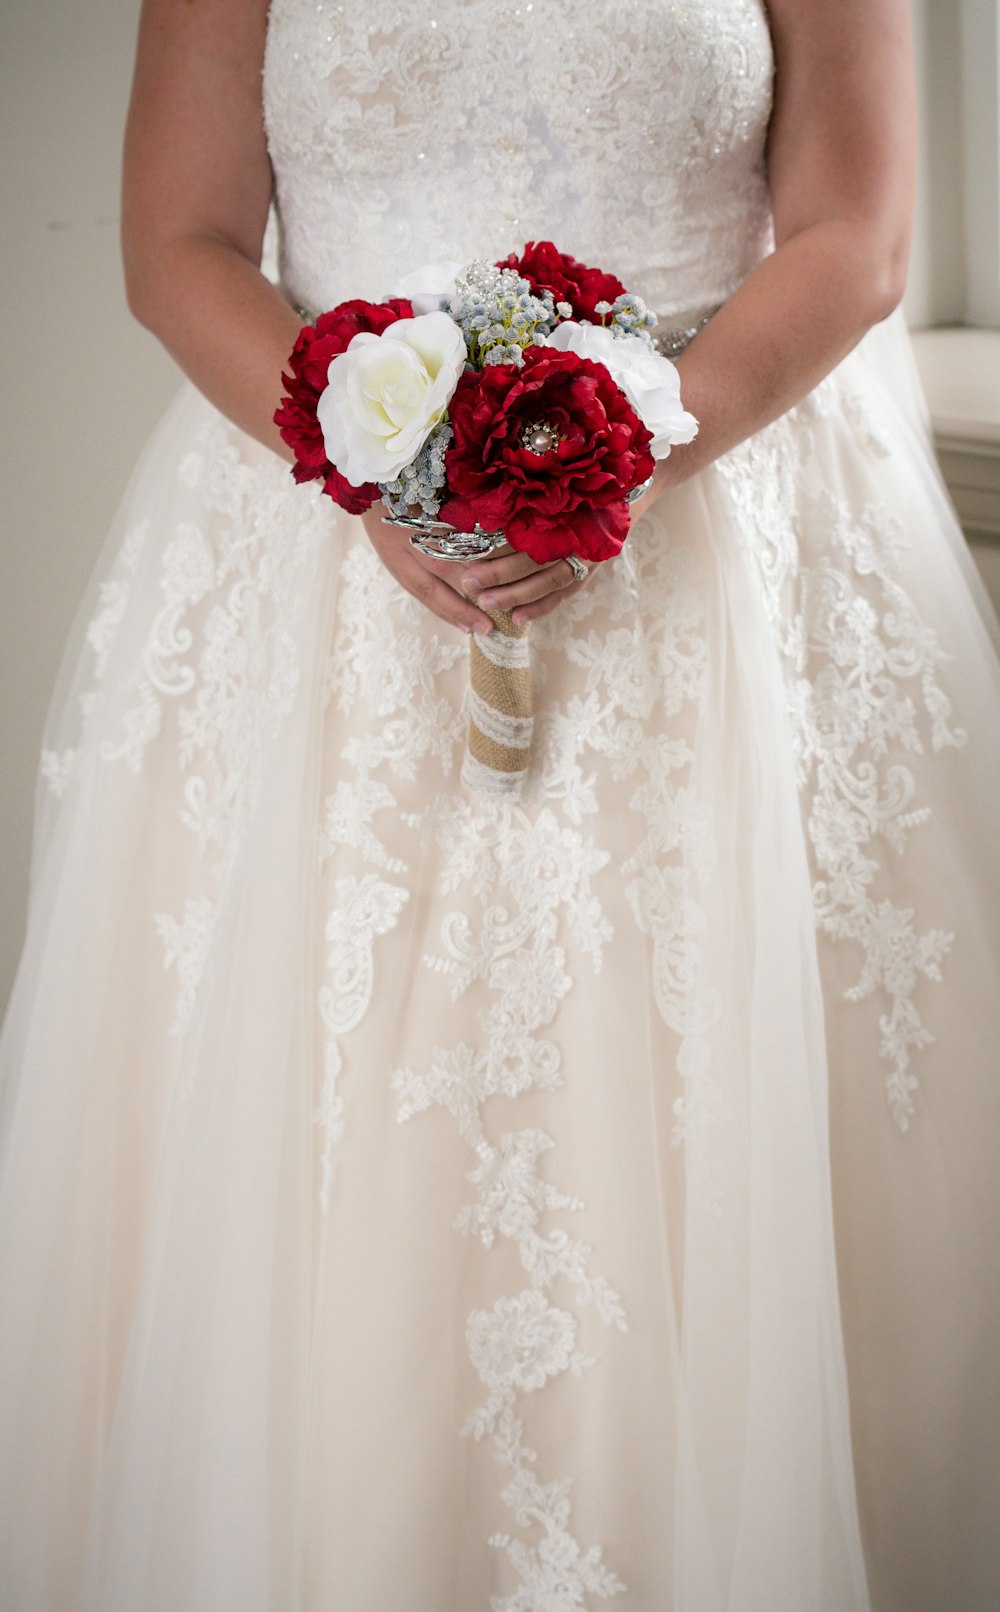 woman in white floral wedding dress holding bouquet of red and white roses